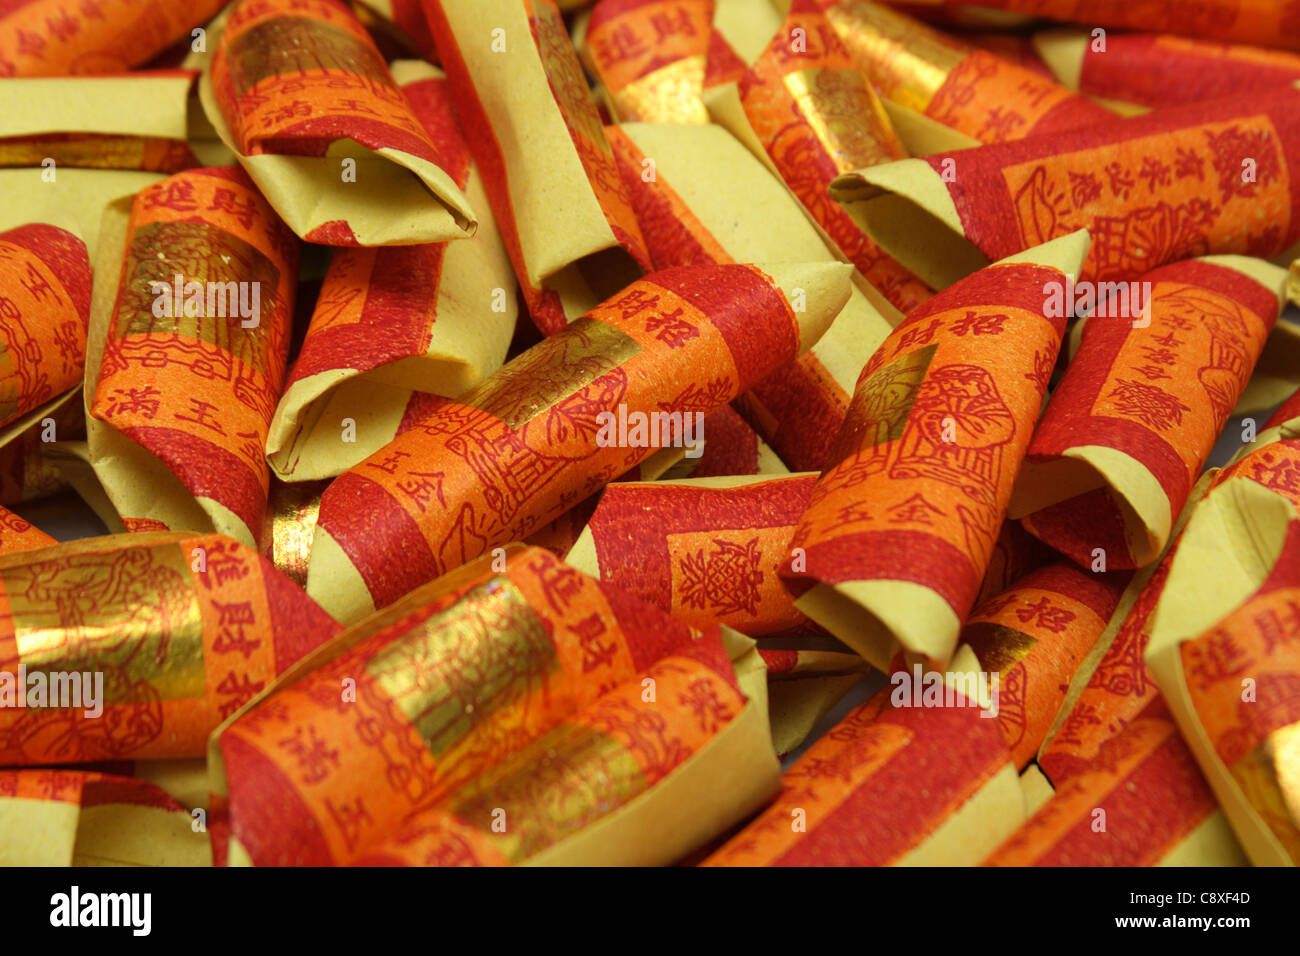 Chinese Joss Paper, Tradition for passed away ancestor's spirits Stock  Photo - Alamy